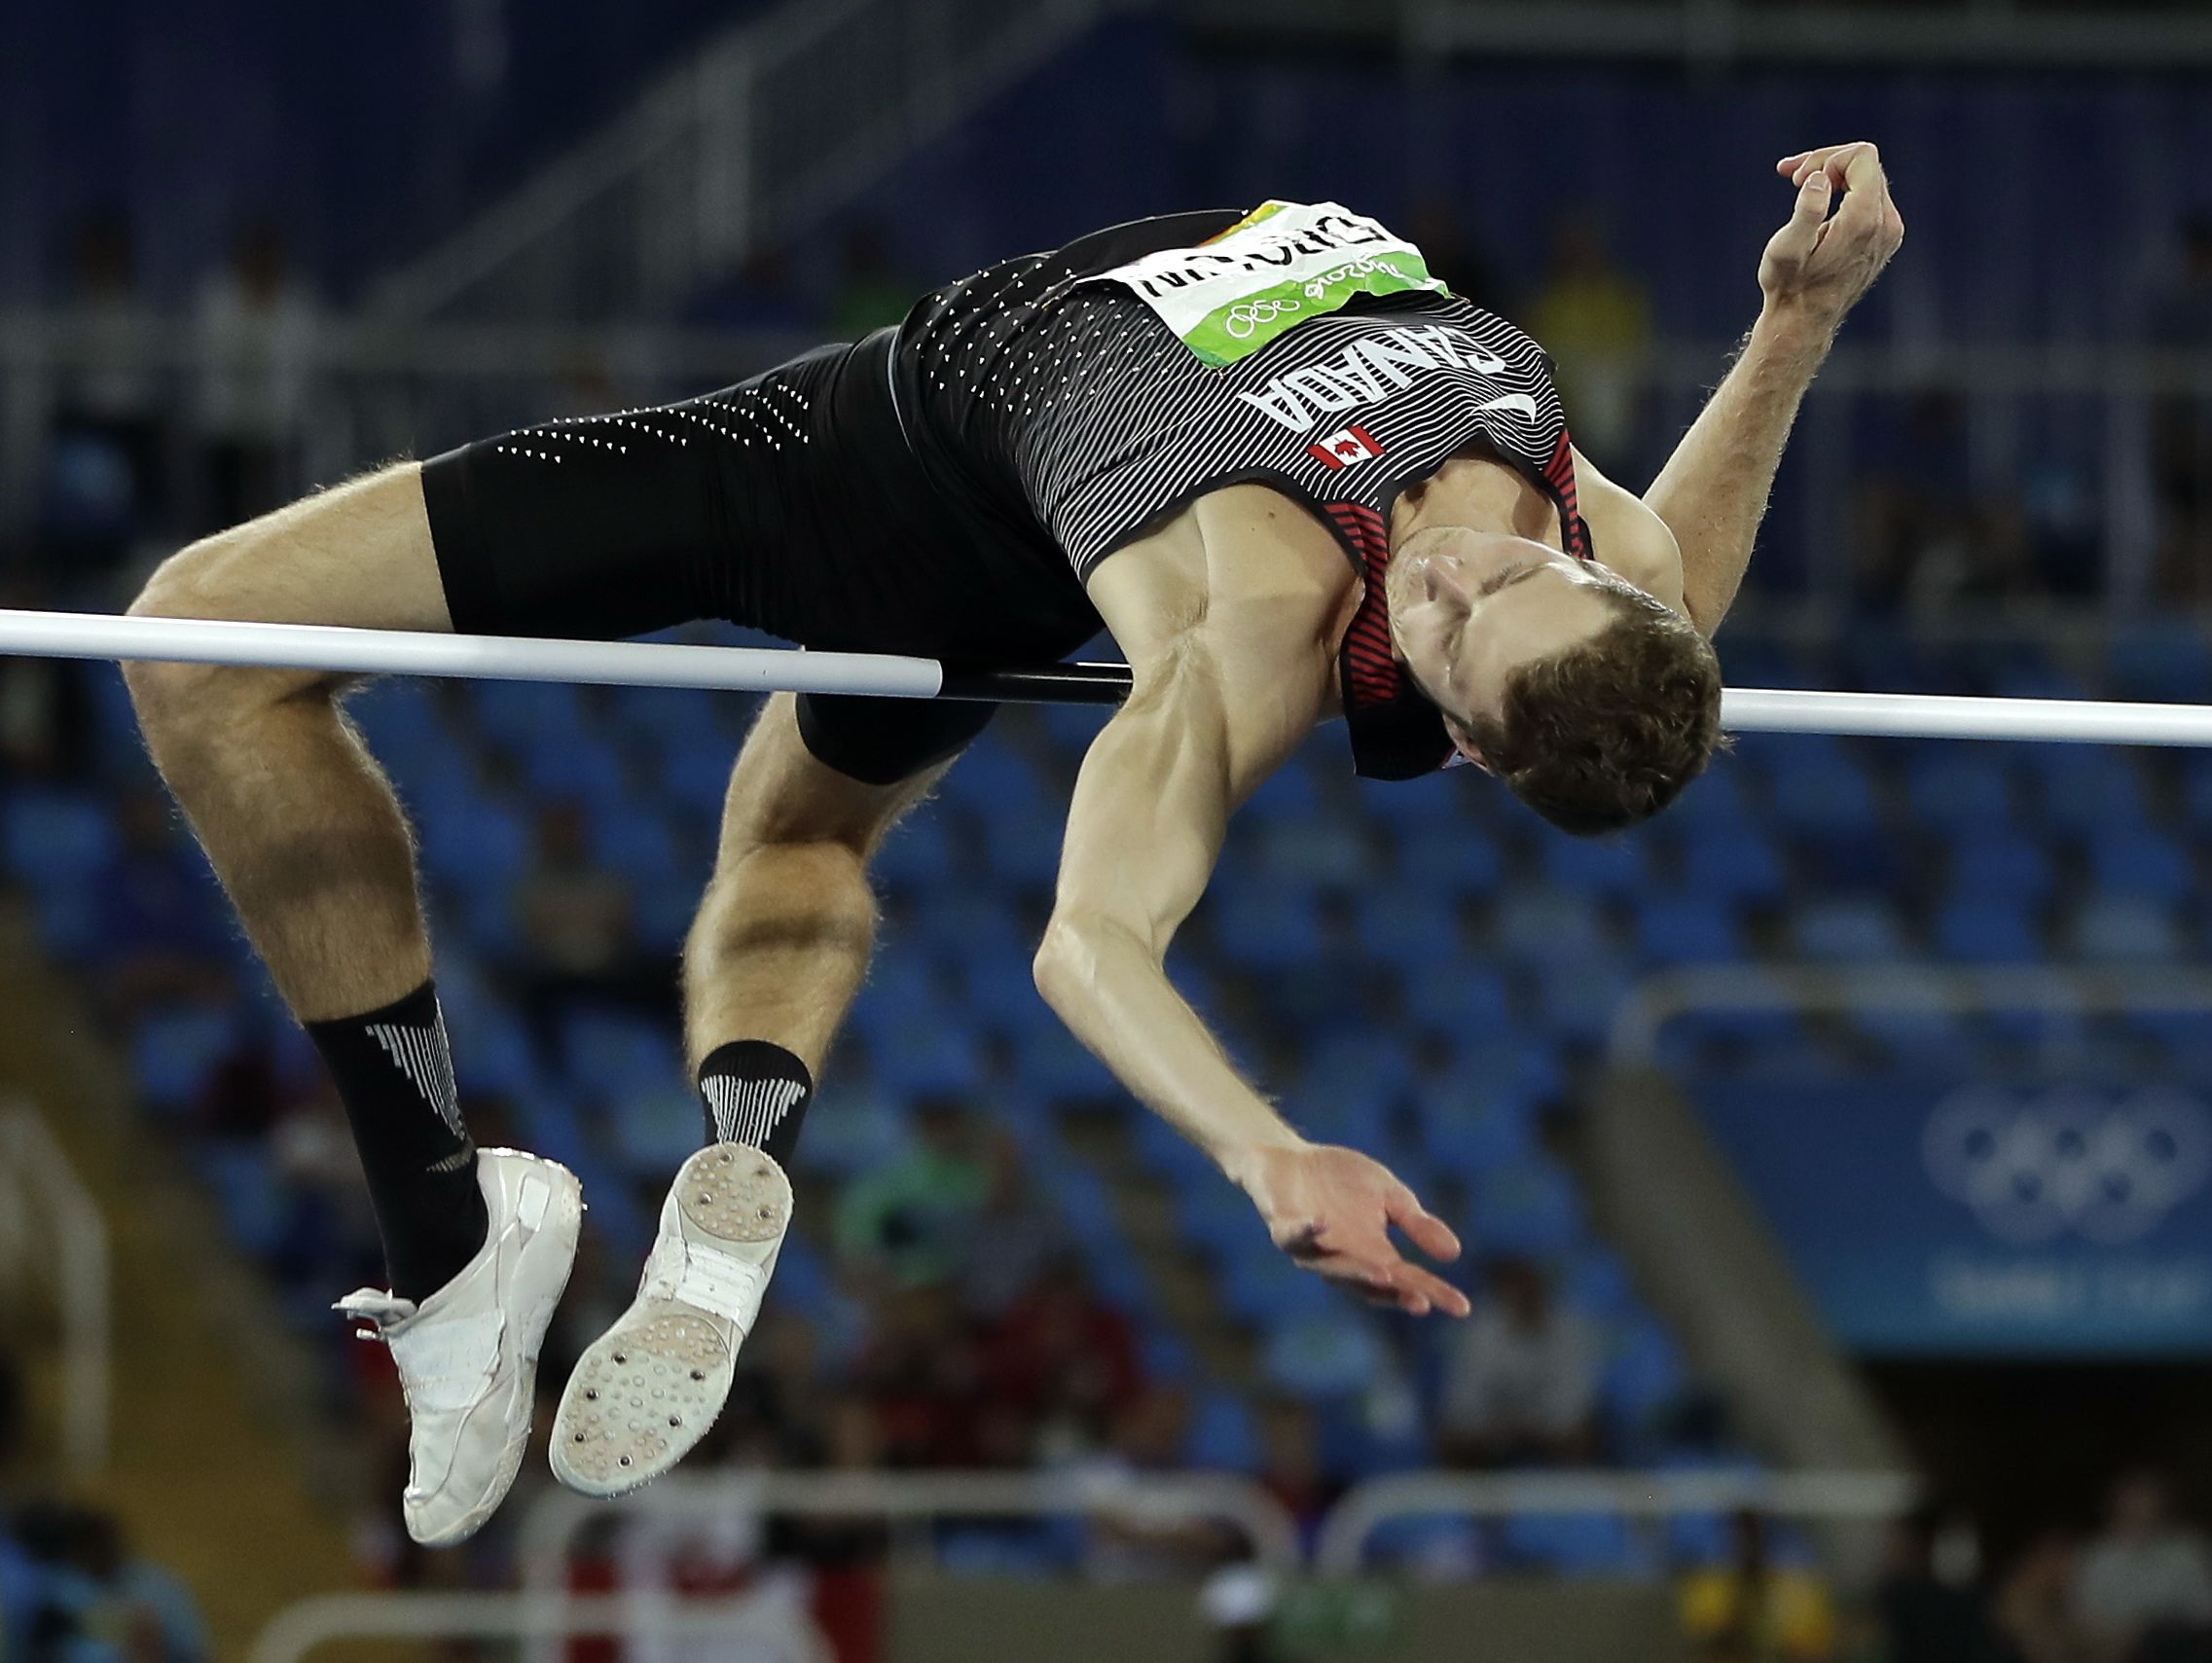 Canada's gold medal winner Derek Drouin competes in the men's high jump final, during the athletics competitions in the Olympic stadium of the 2016 Summer Olympics in Rio de Janeiro, Aug. 16, 2016.